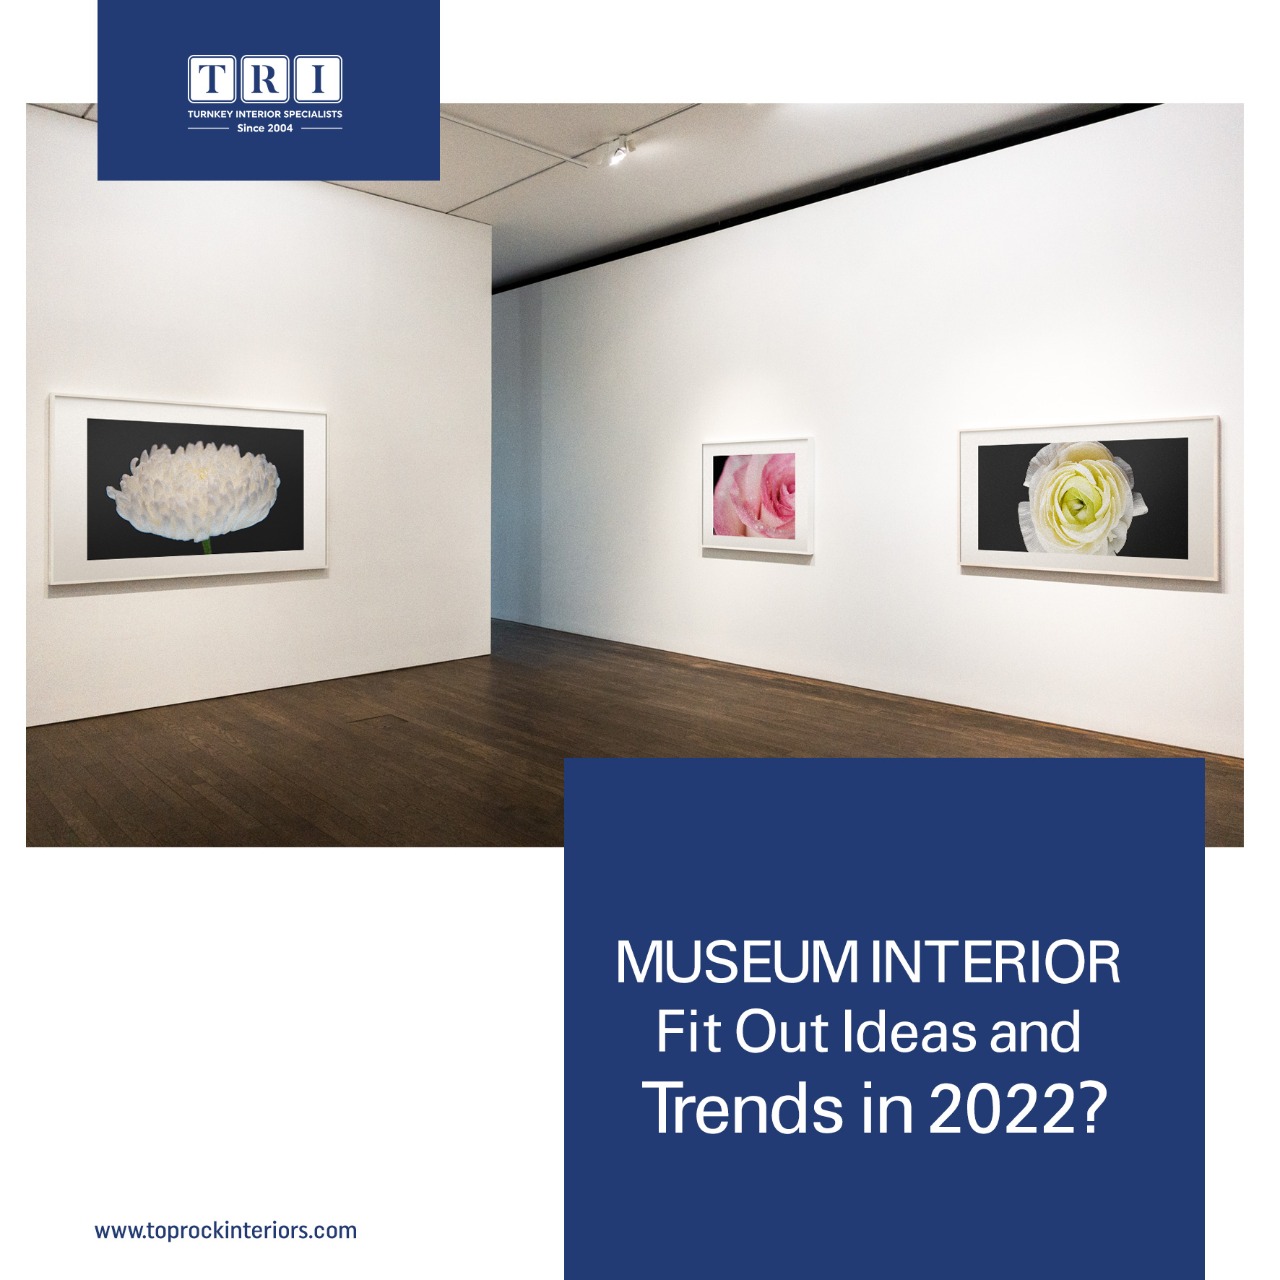 Museum Interior Fit Out Ideas and Trends in 2022?